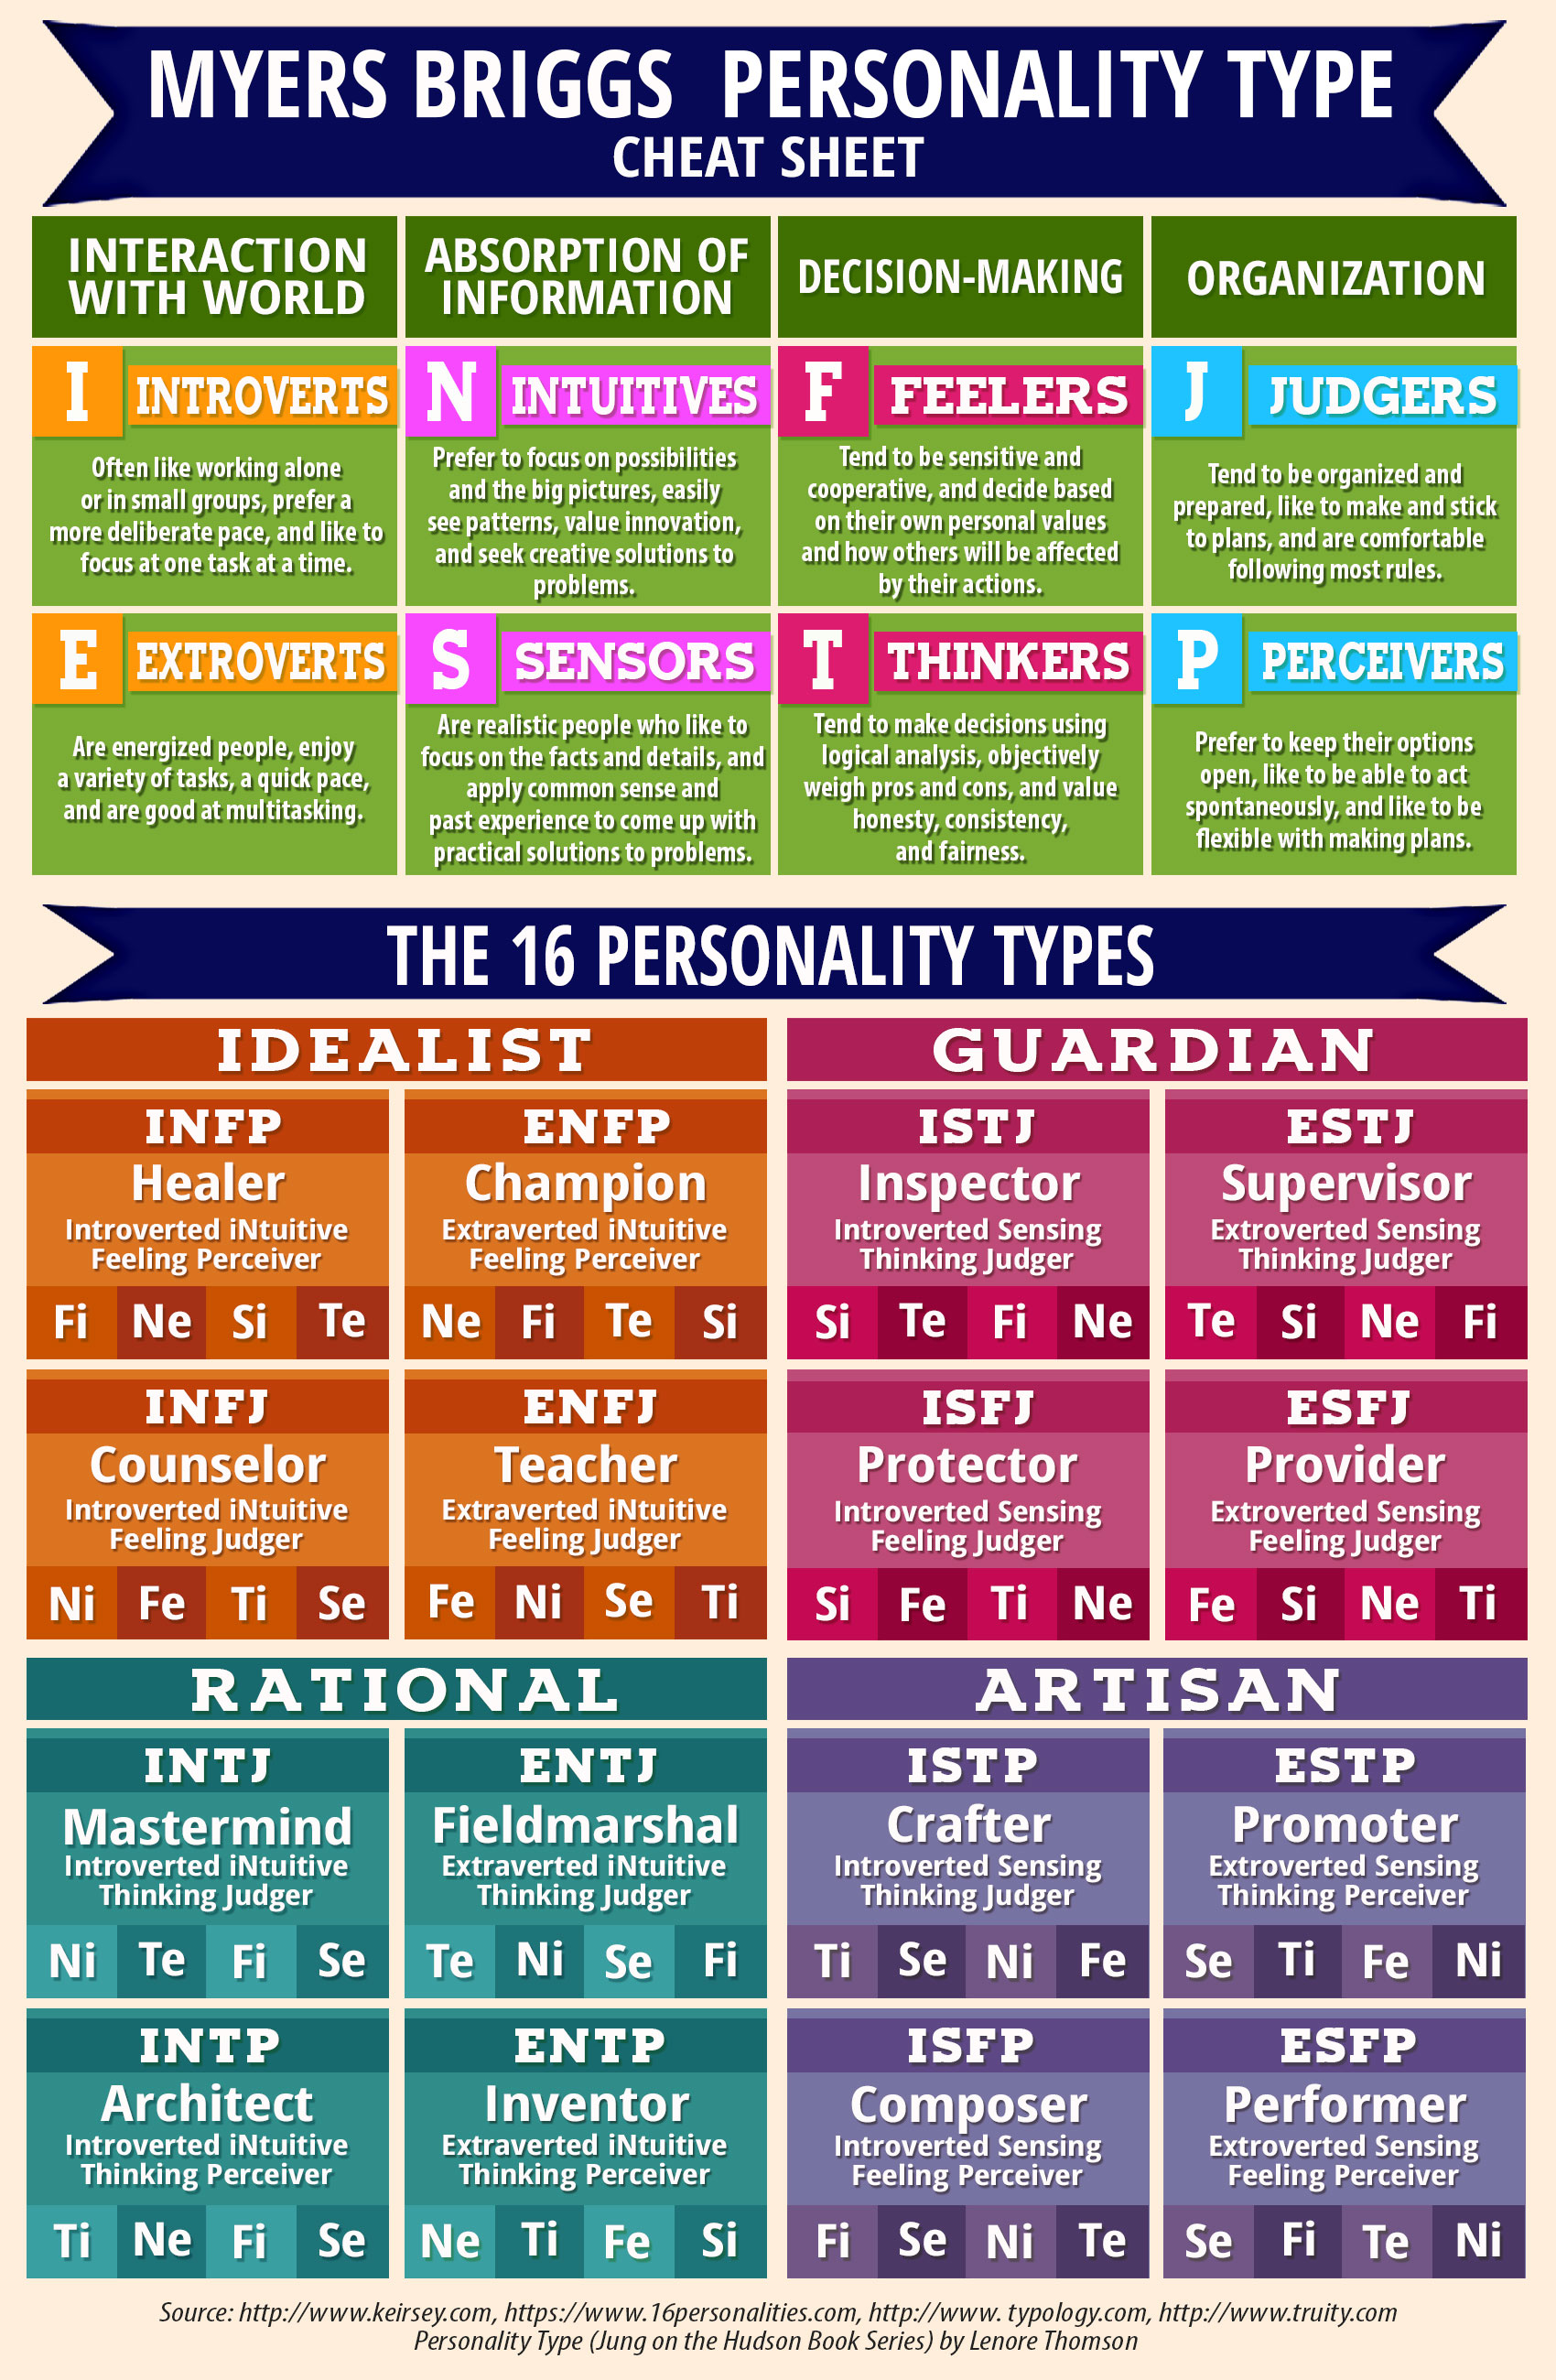 image-typologycentral-myers-briggs-personality-type-cheat-sheet-jpg